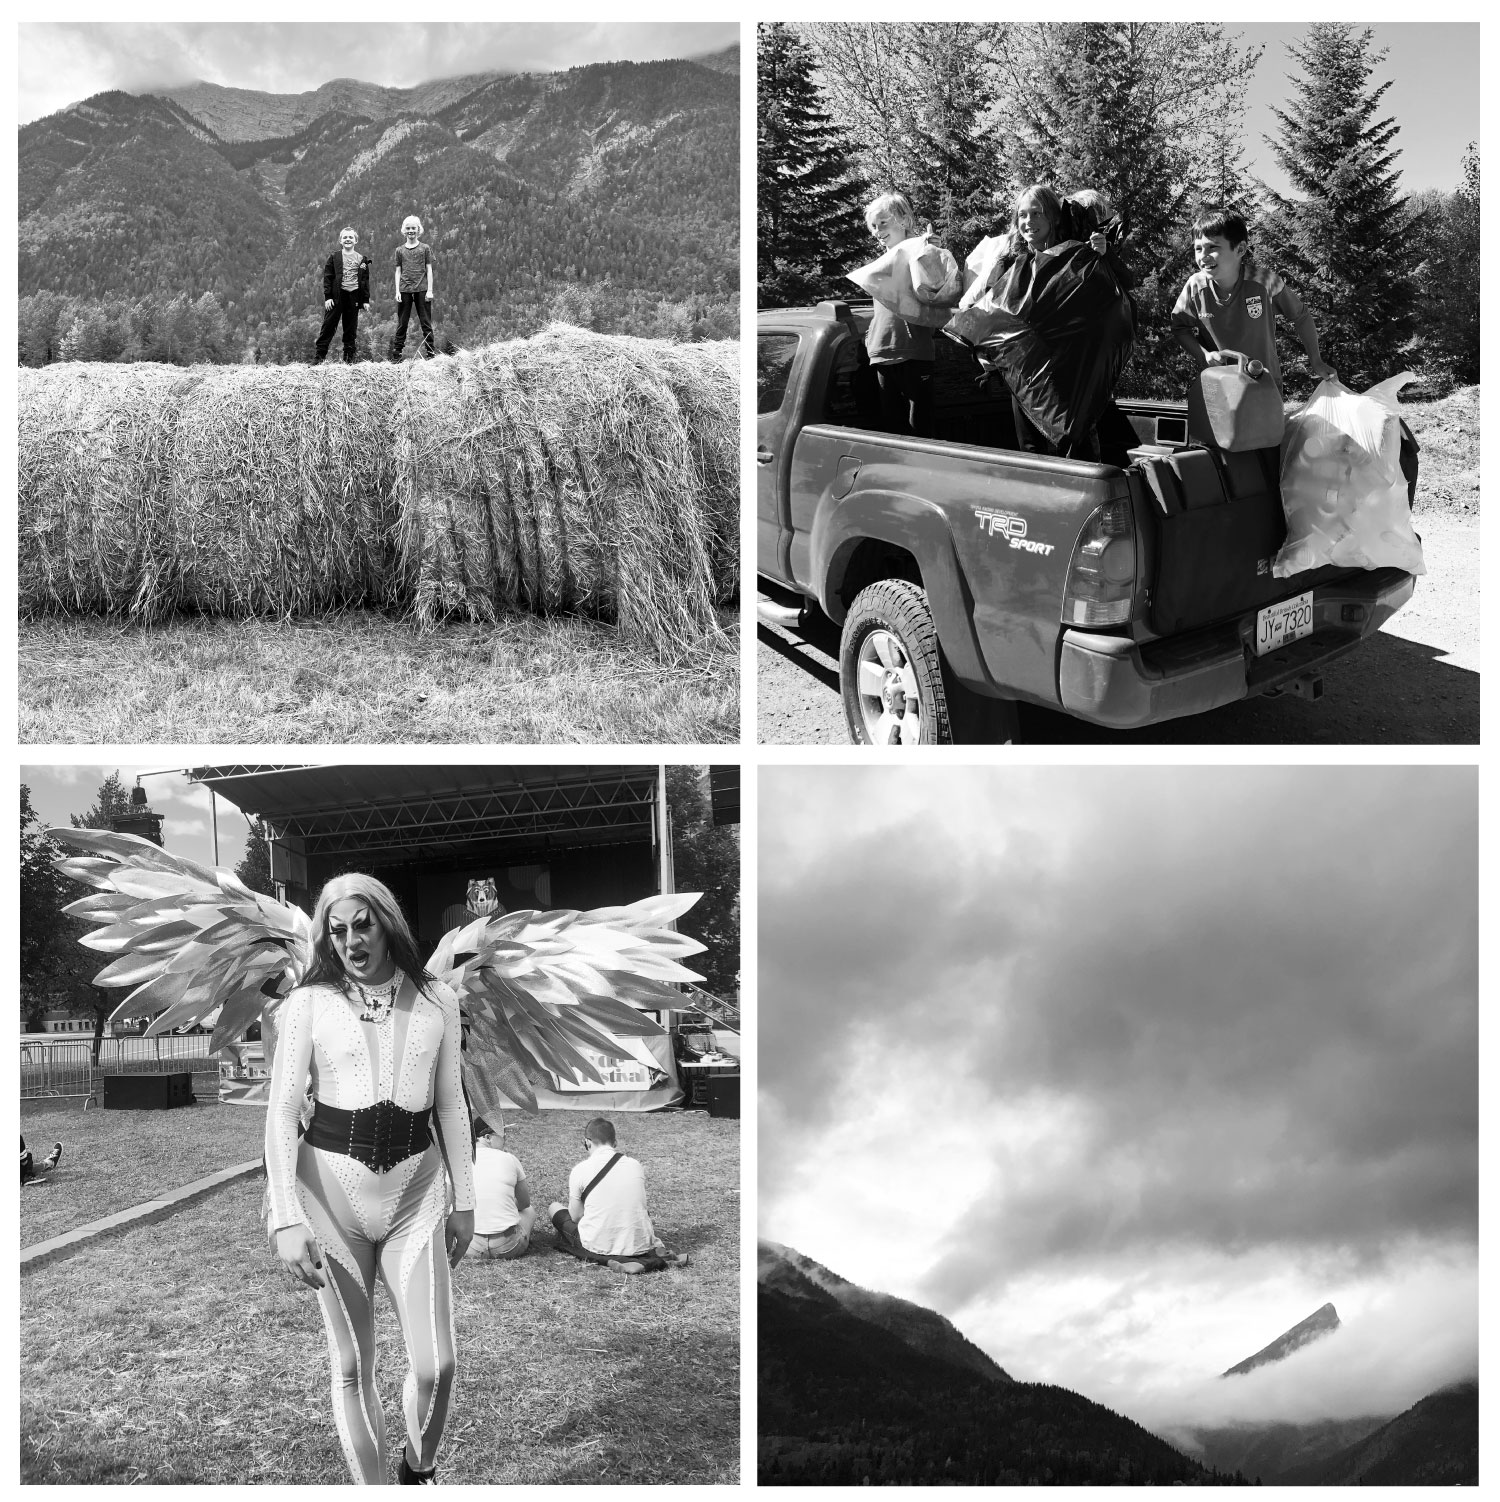 Today In Fernie - photos from Spectrum Arts Festival, Elk River Alliance clean up 2022, a sleepover, and the three sisters mountains in Fernie. Black and white photography every day.